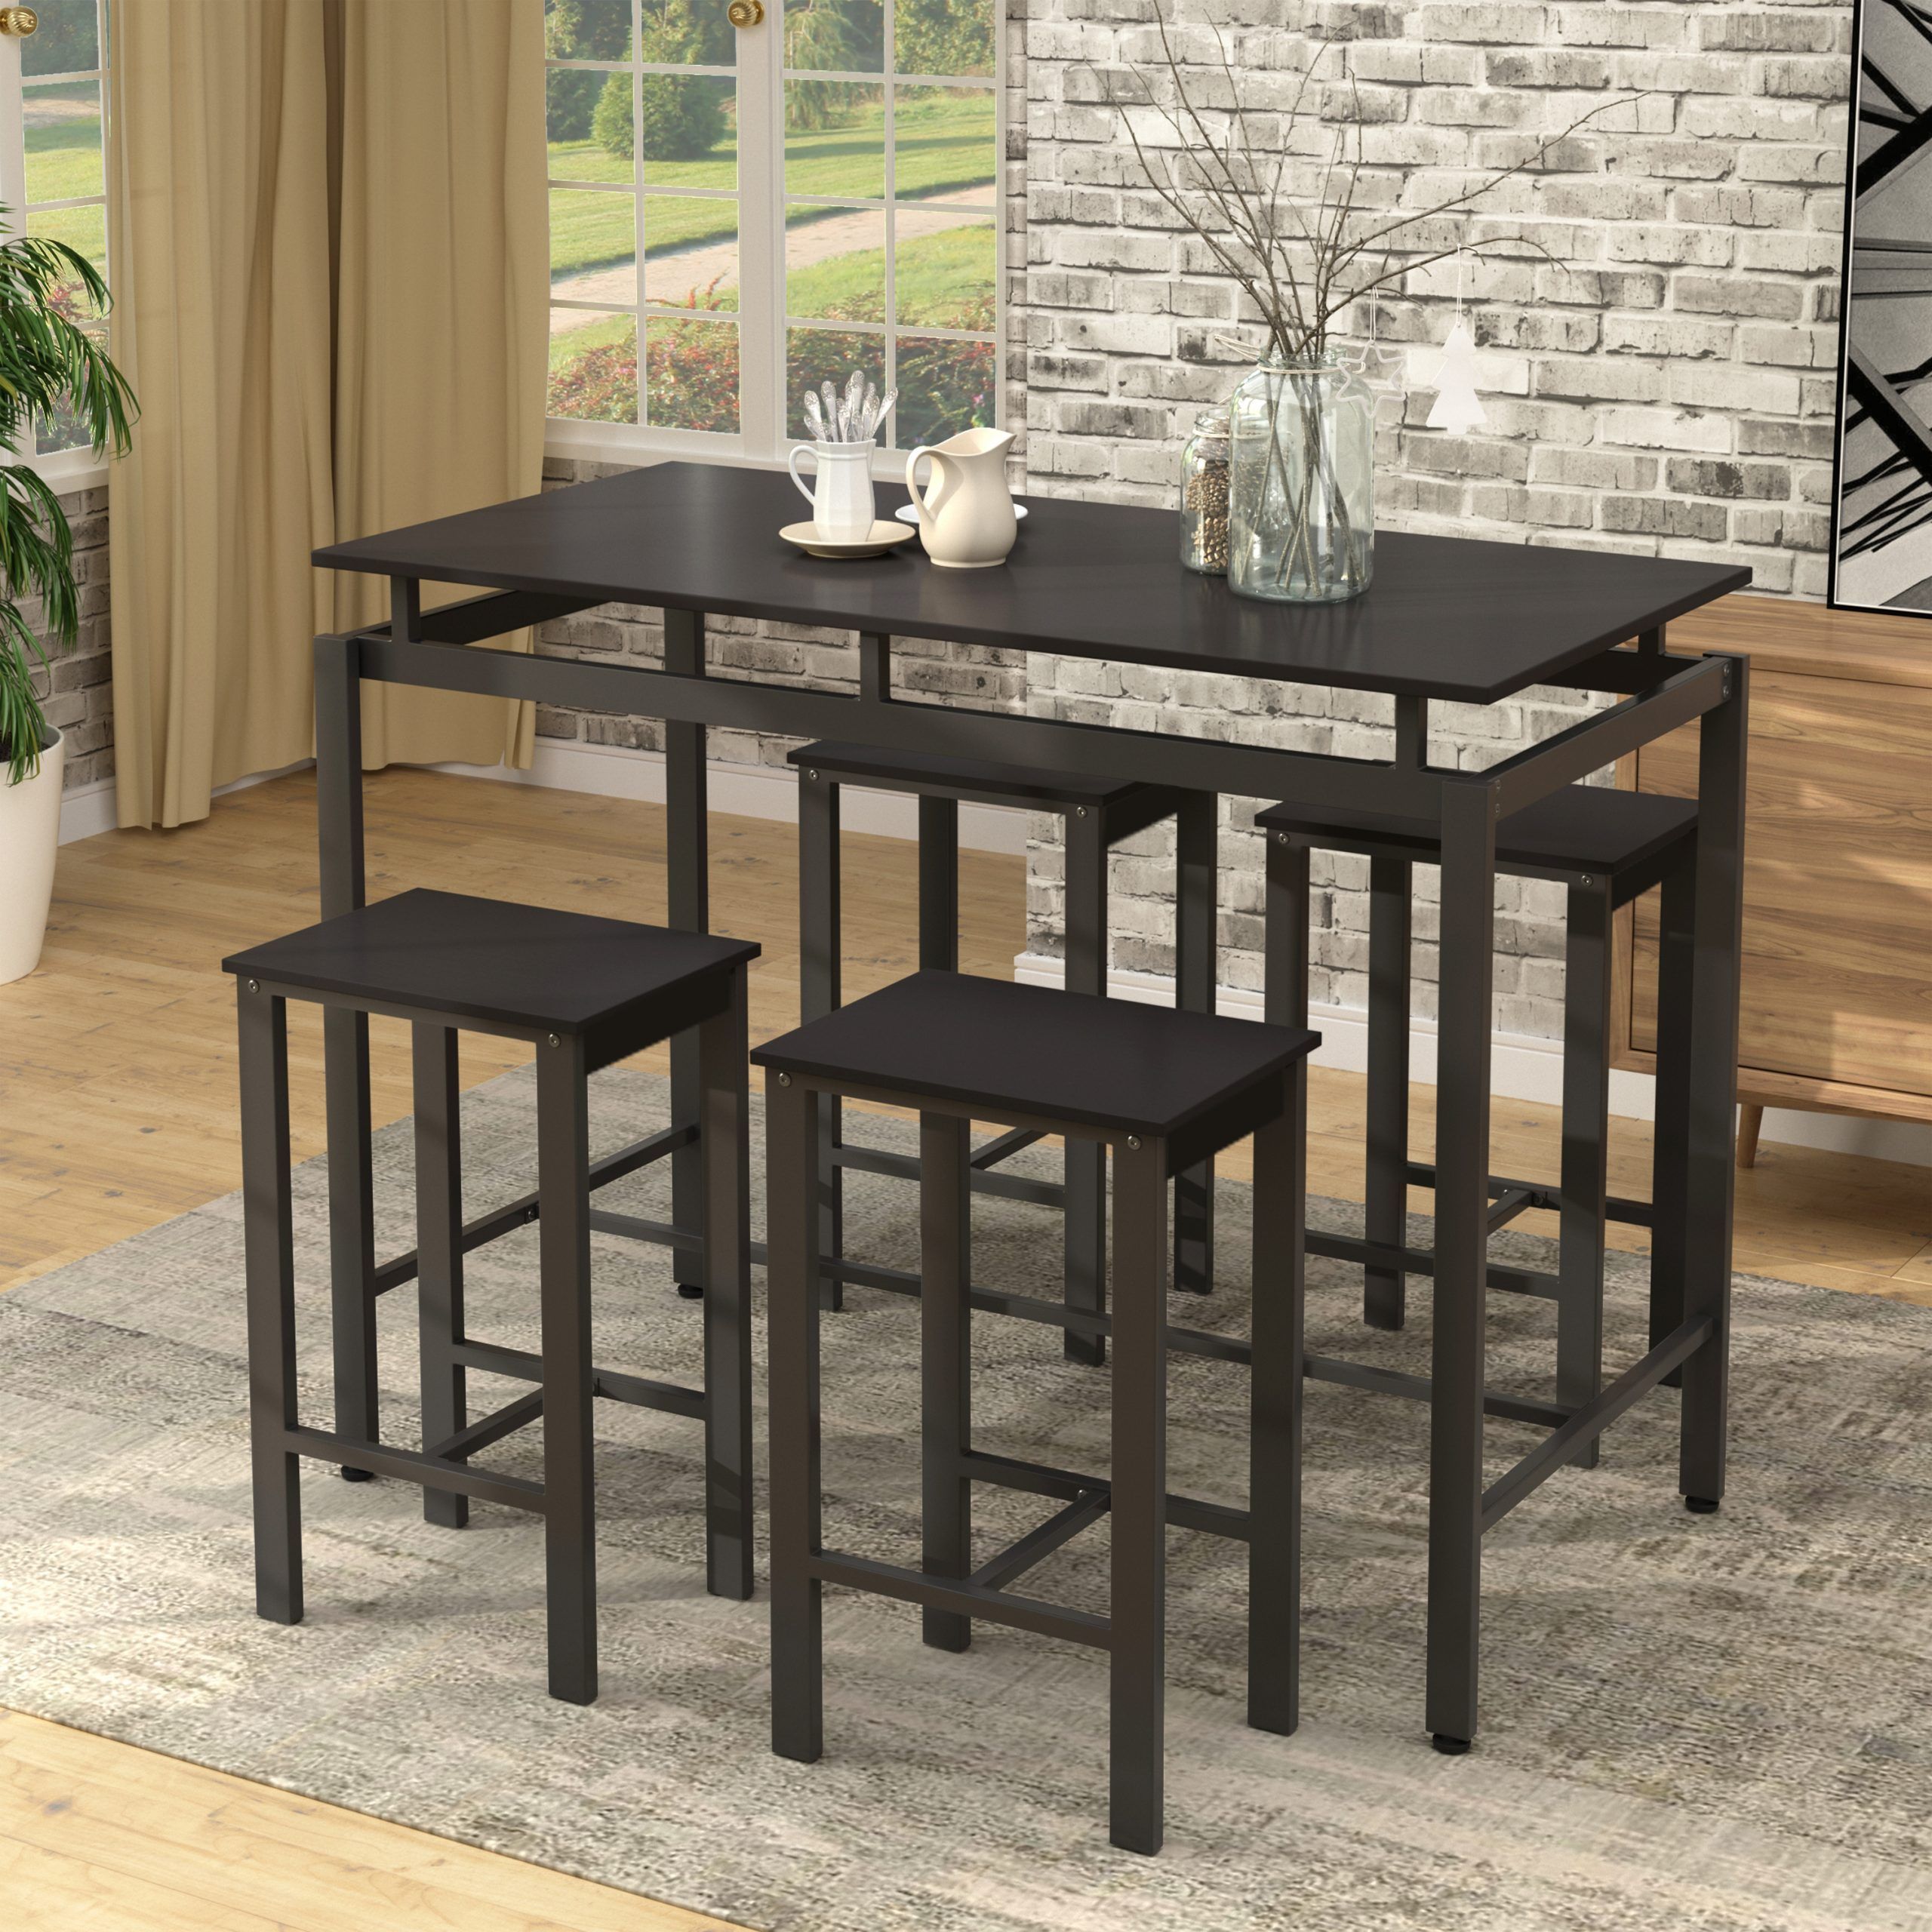 Counter Height Table Set Of 5, Breakfast Bar Table And Stool Set Intended For Trendy Wood Bistro Table And Chairs Sets (View 12 of 15)